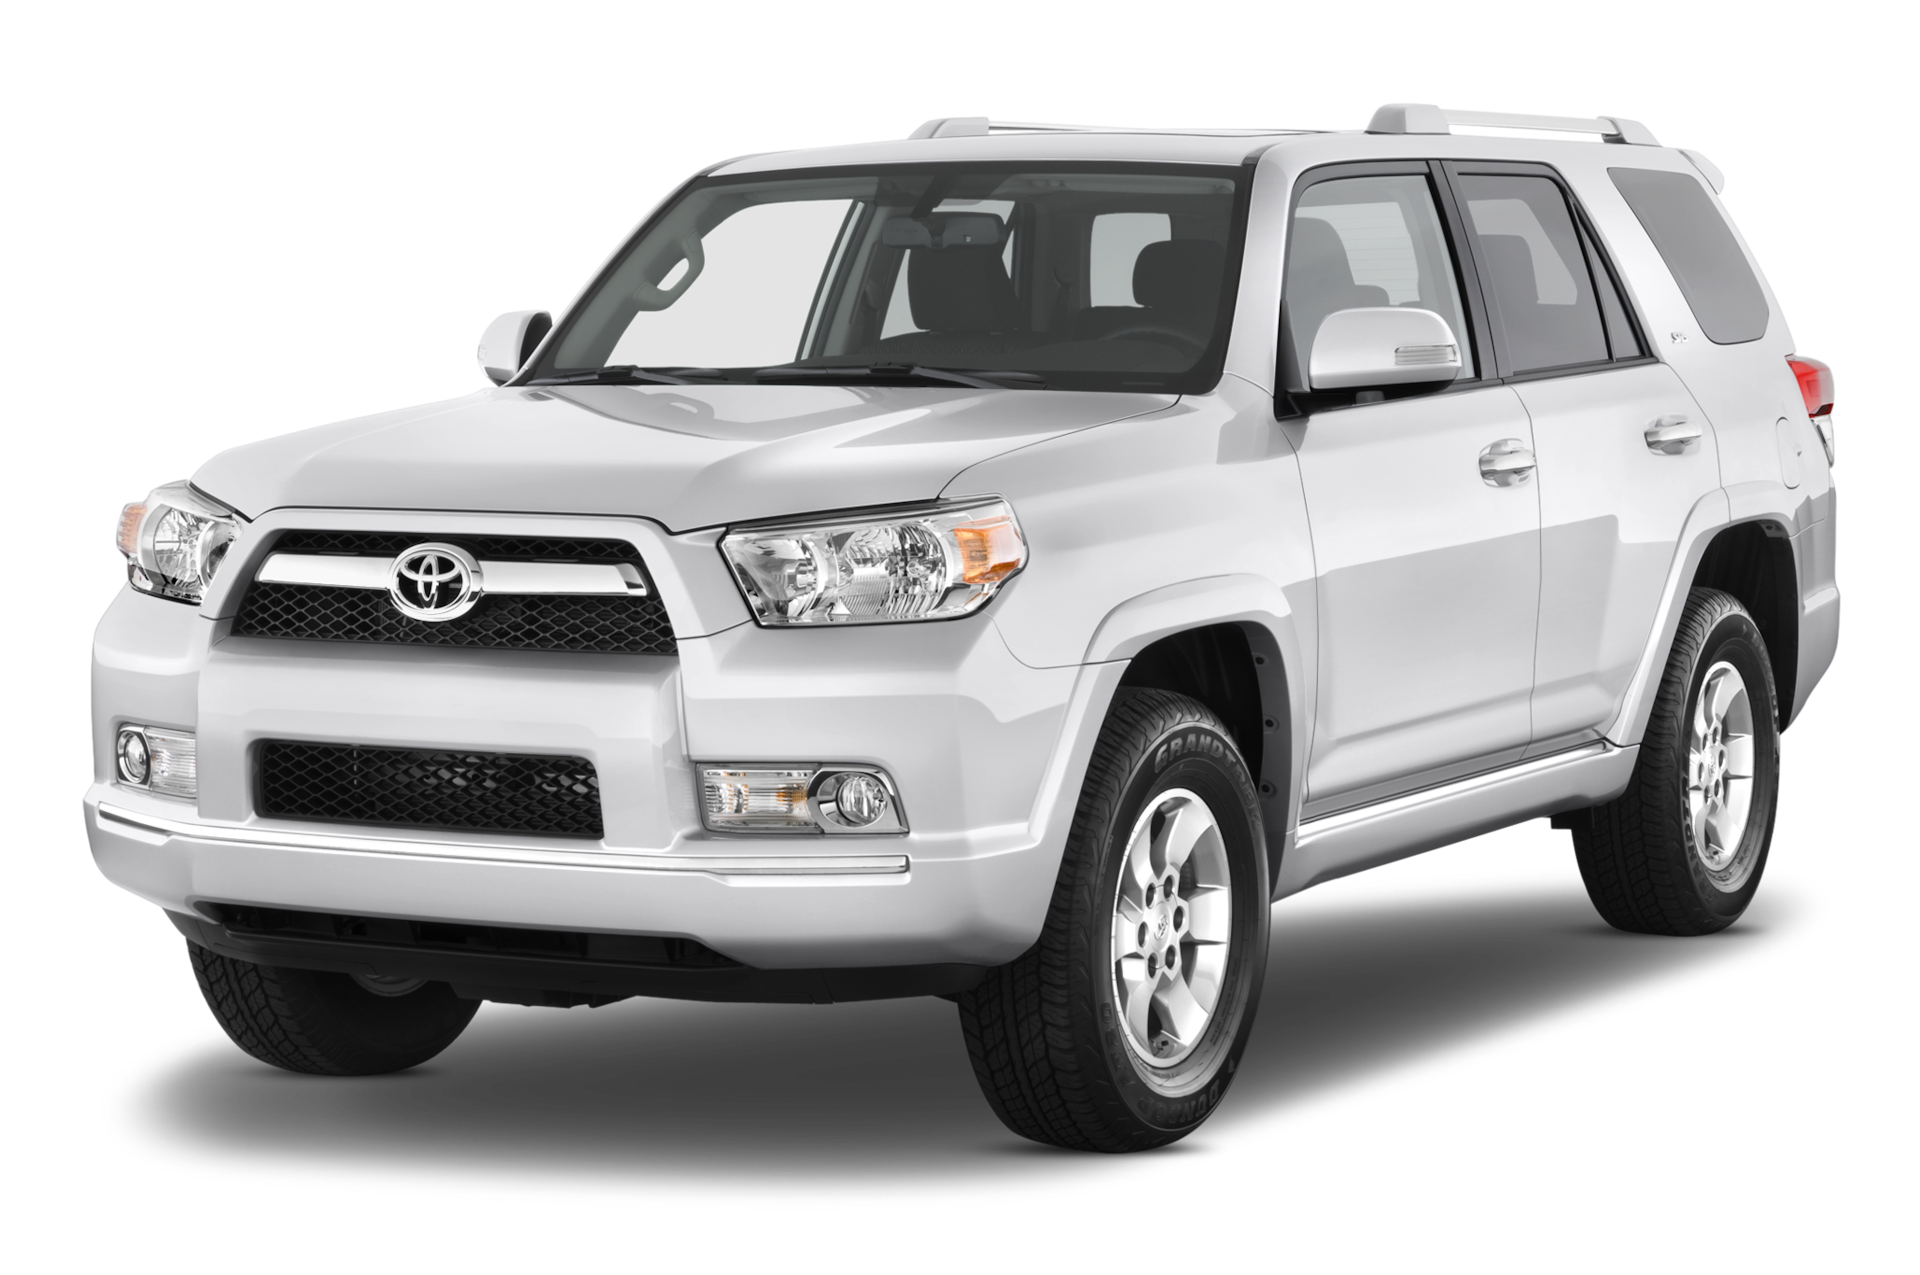 2013 Toyota 4Runner Prices, Reviews, and Photos - MotorTrend